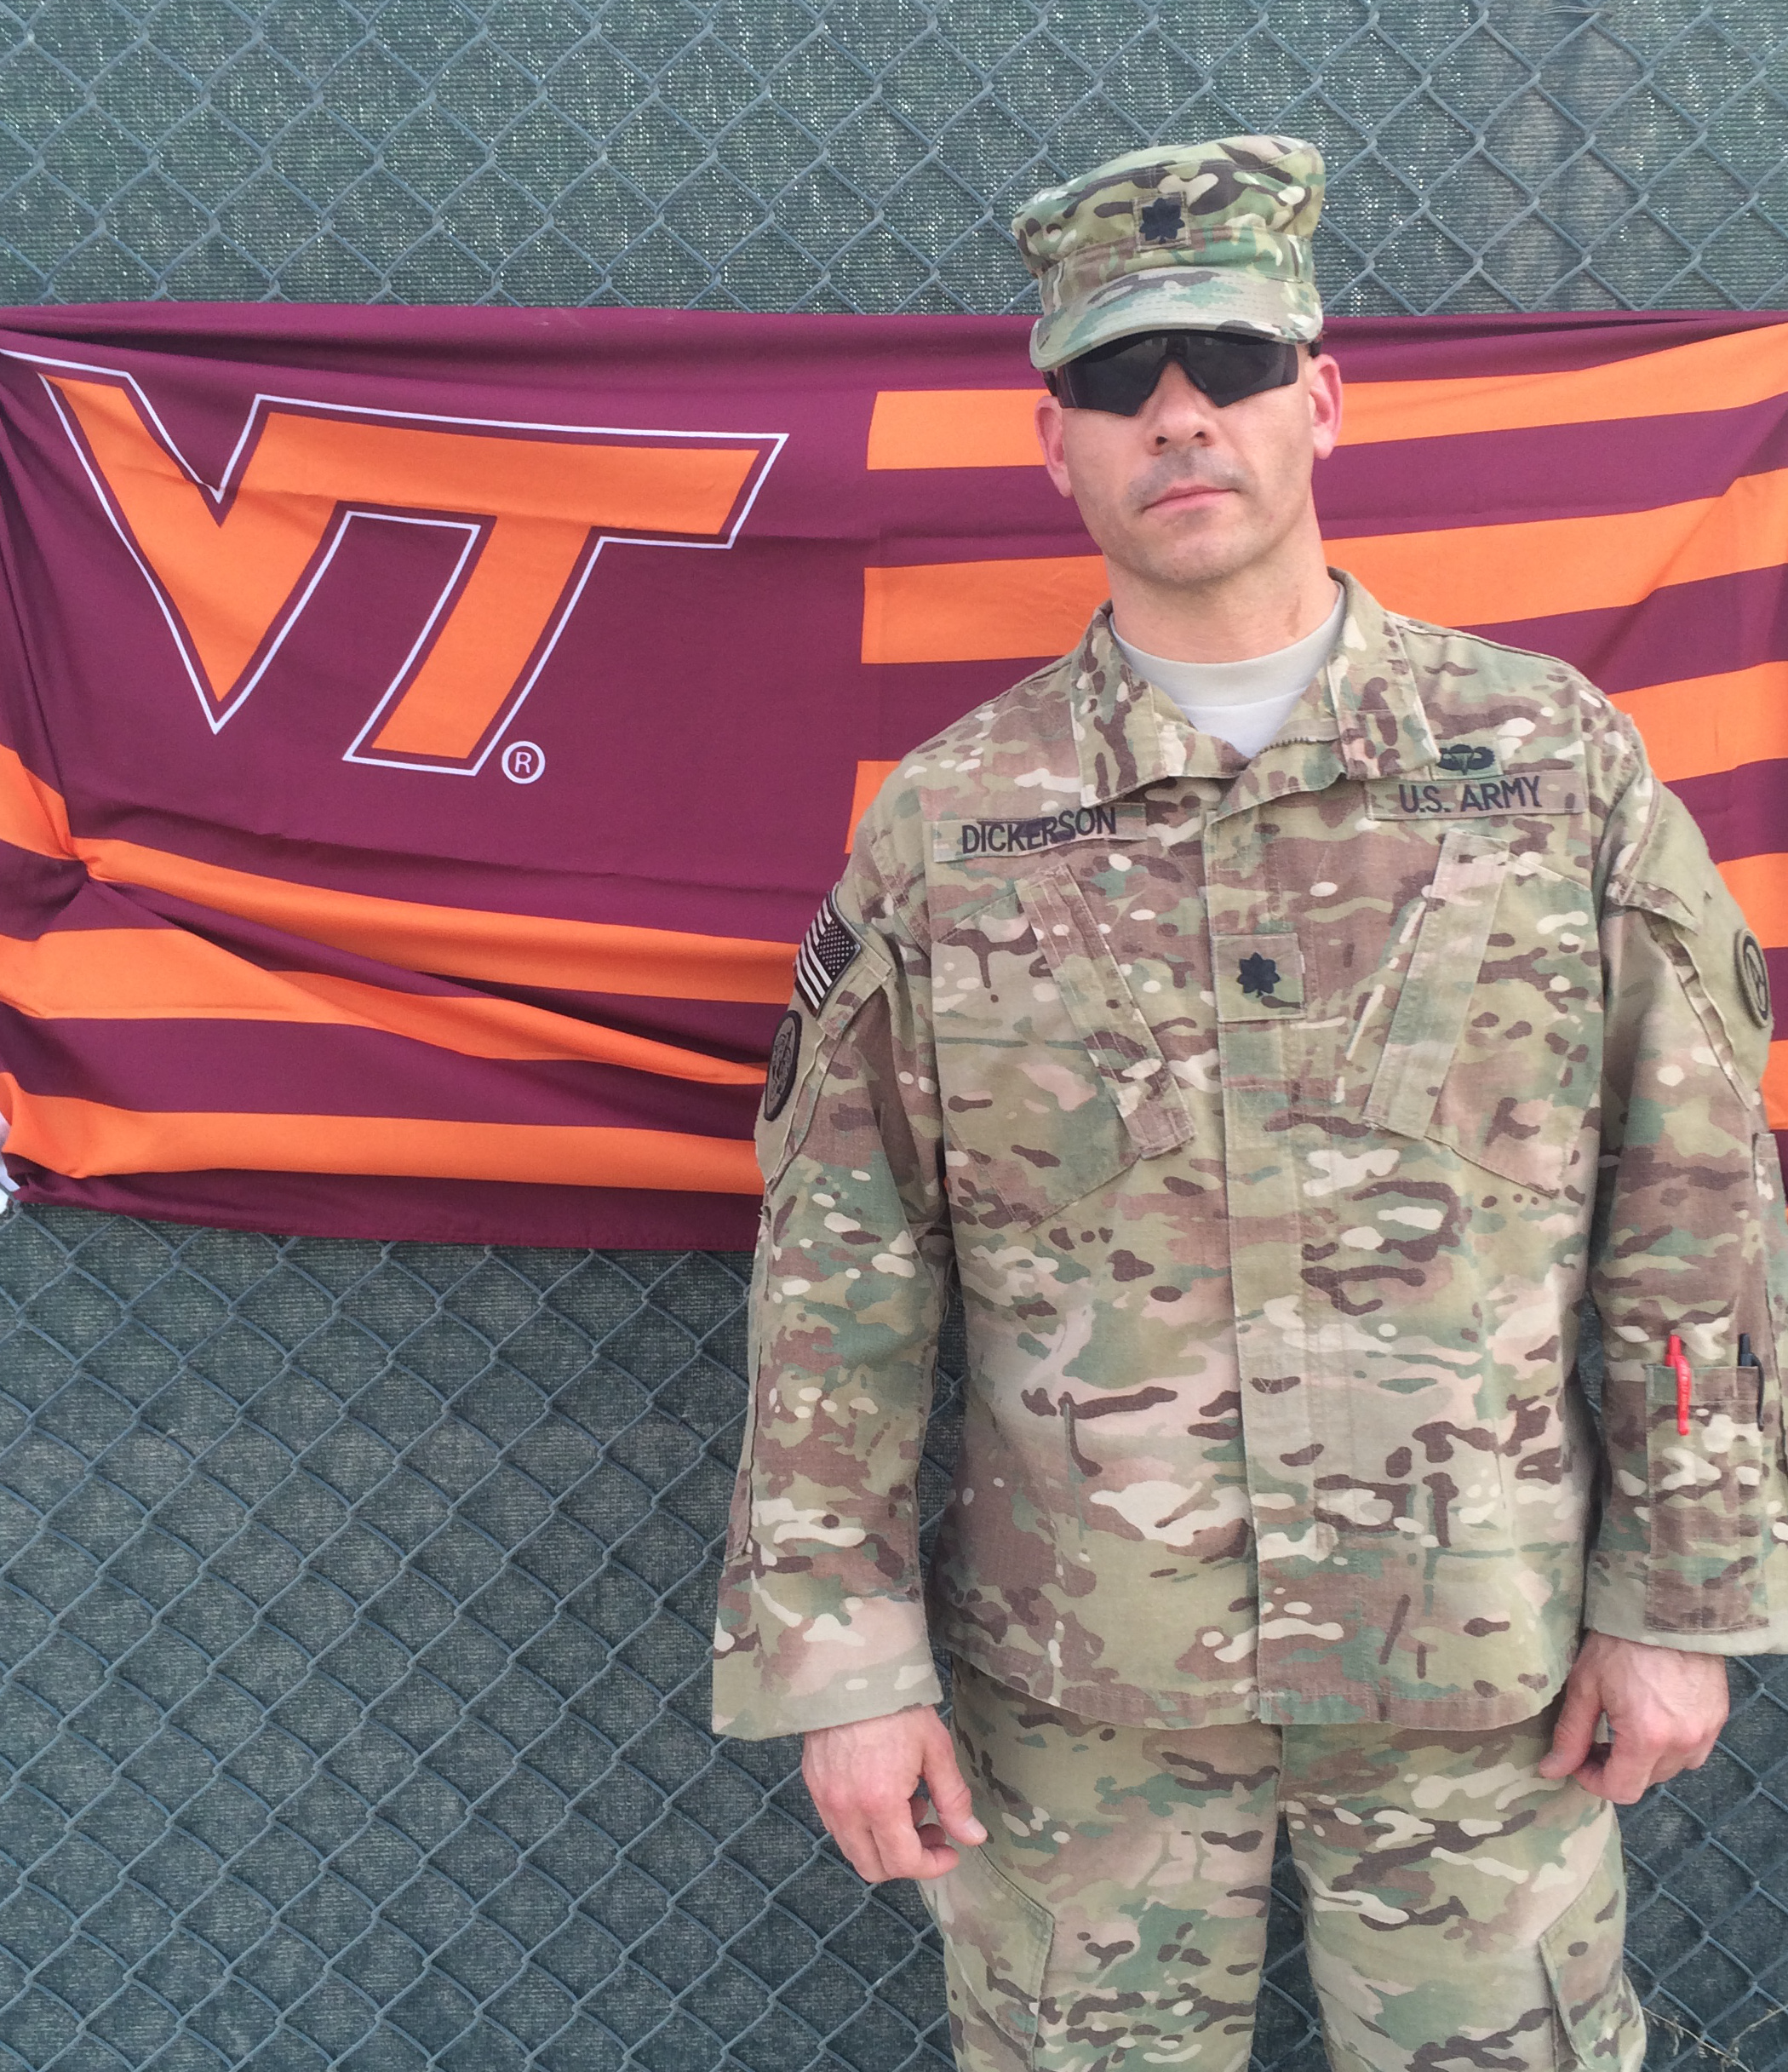 Lt. Col. Kelly Dickerson, U.S. Army, Virginia Tech Corps of Cadets Class of 1995 in front of a VT flag.